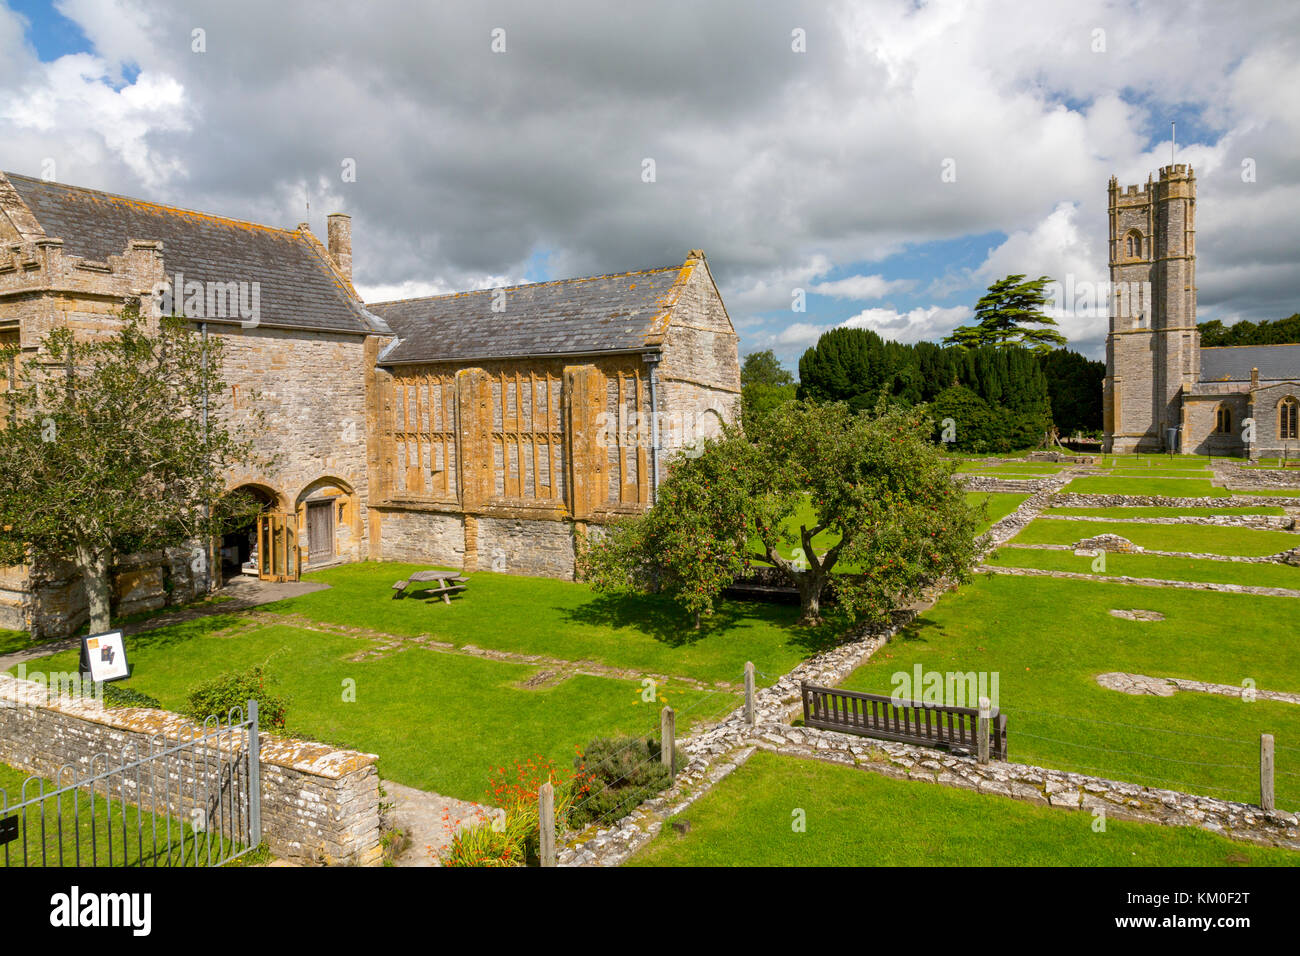 Only the Abbot's House of the former medieval Benedictine abbey and the positions of walls and buildings remain in Muchelney, Somerset, England, UK Stock Photo